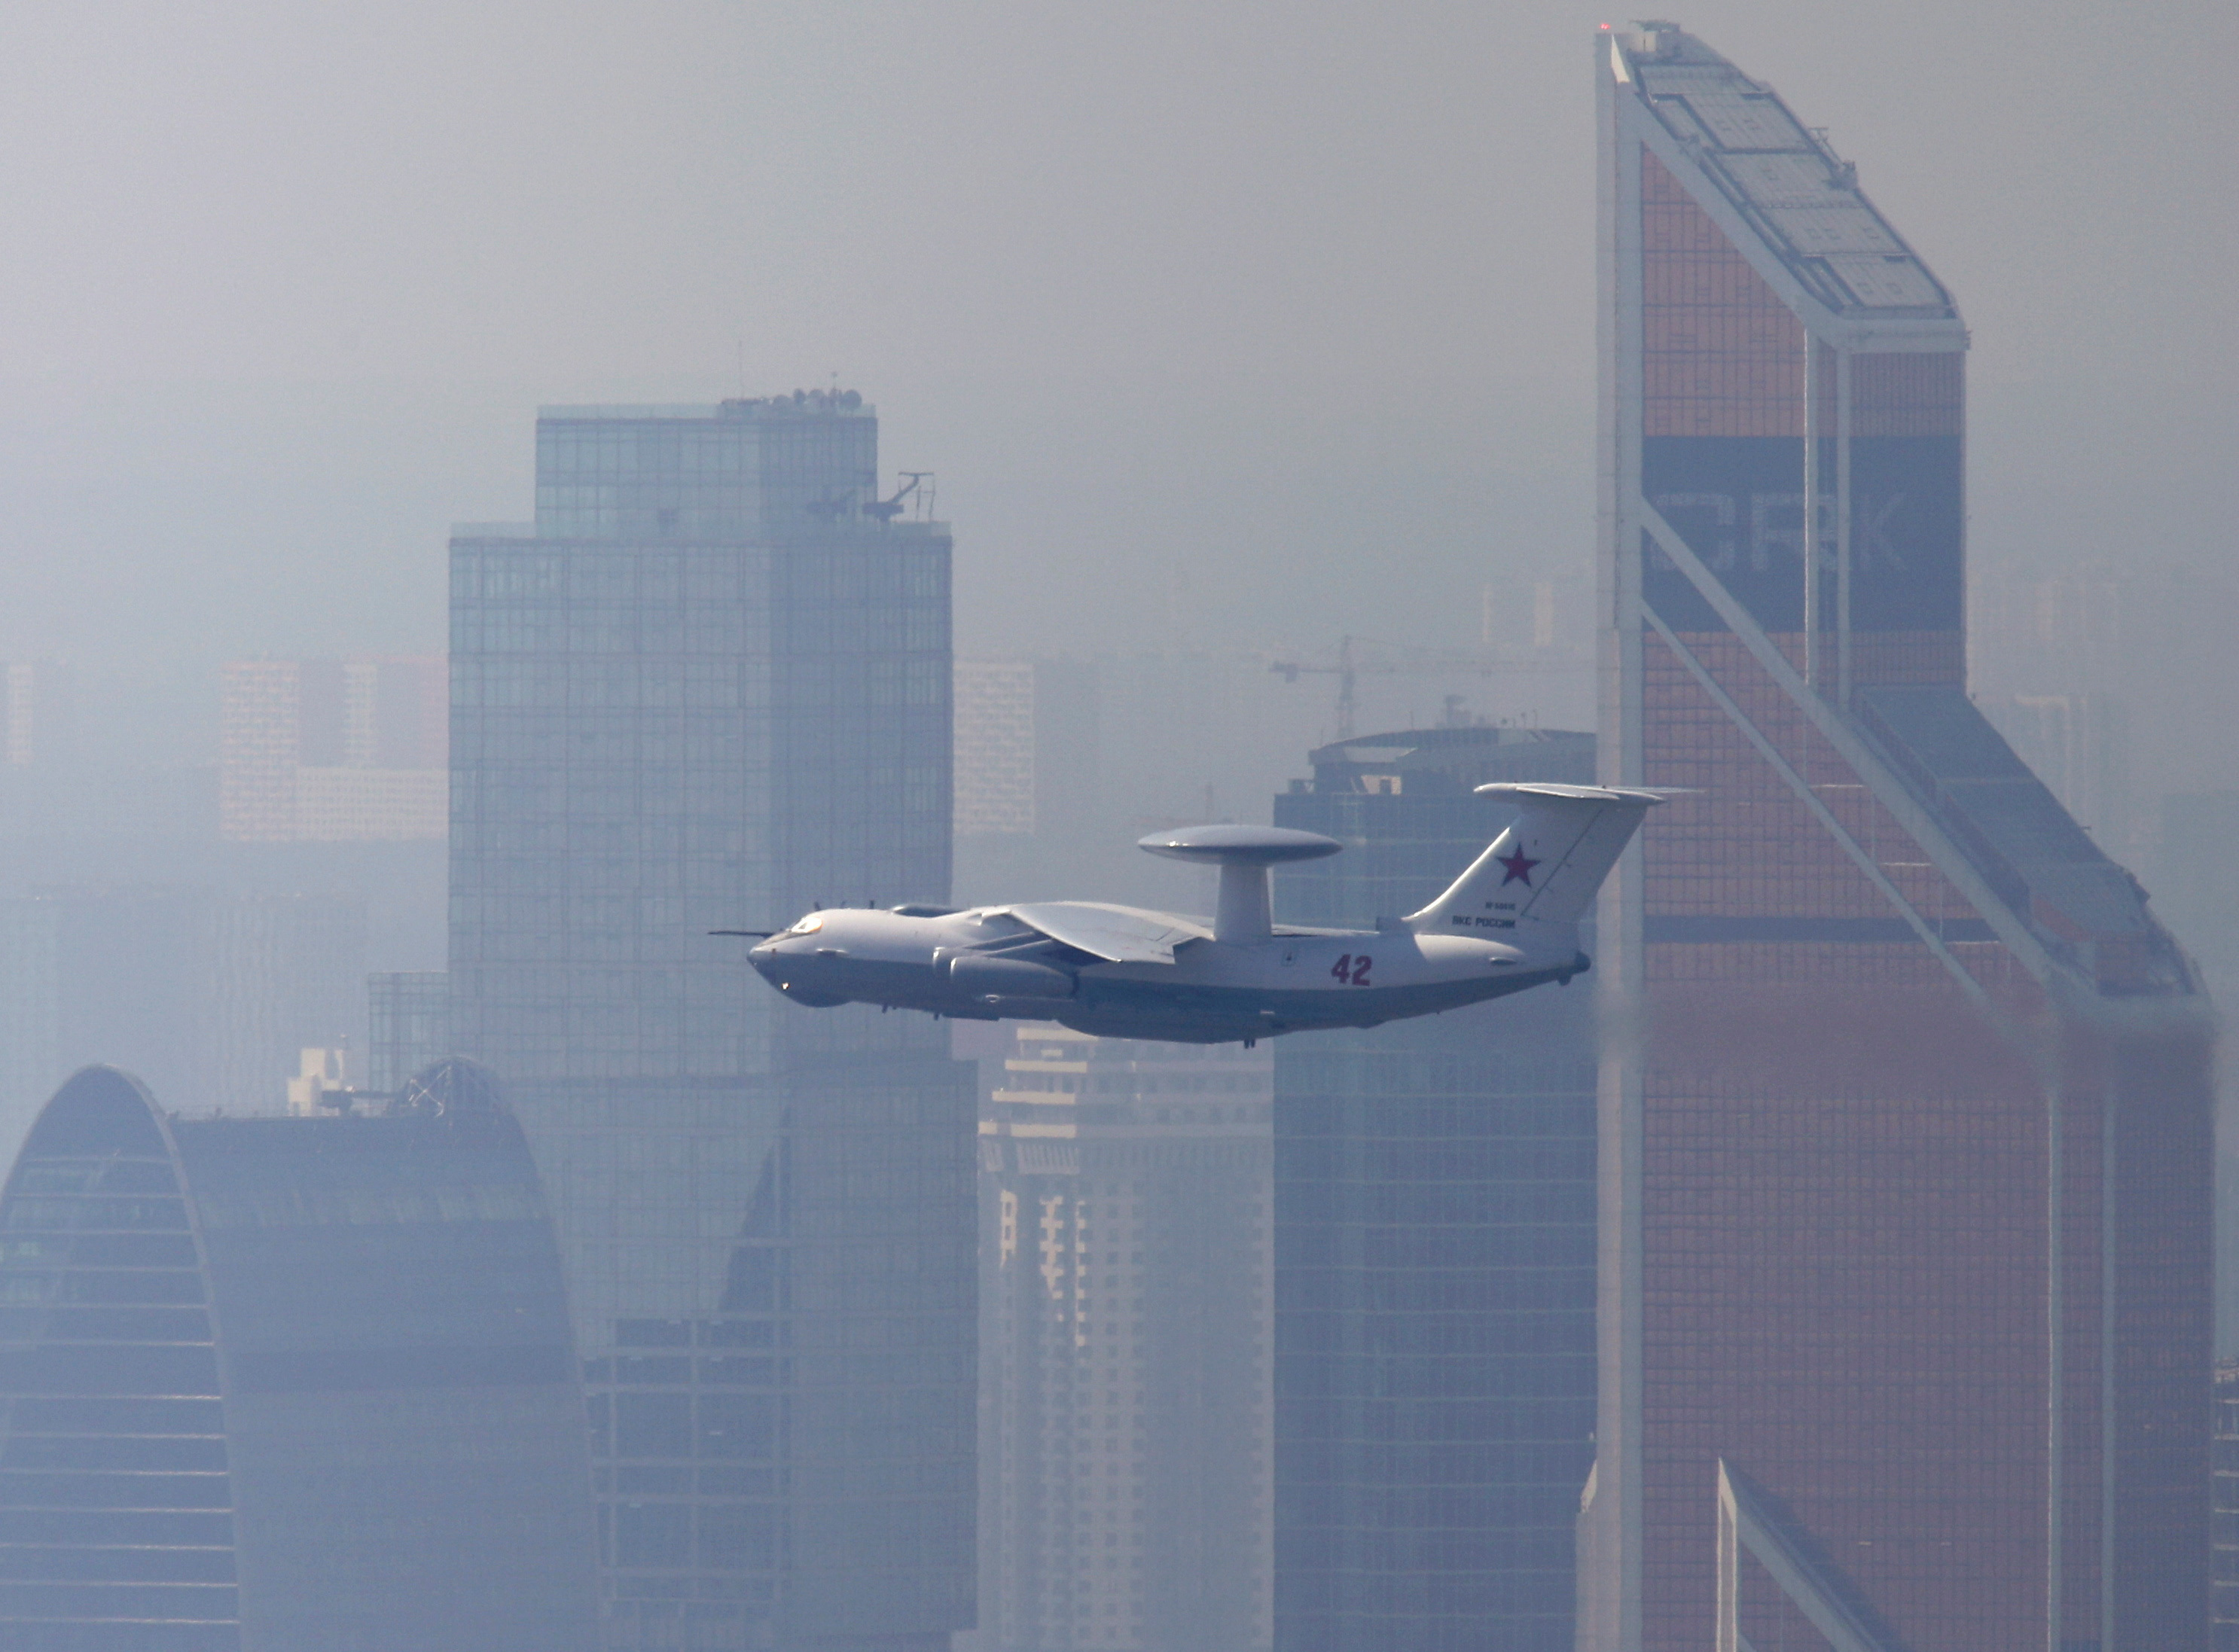 Beriev A-50 early warning aircraft flies during a rehearsal for the Victory Day parade in Moscow